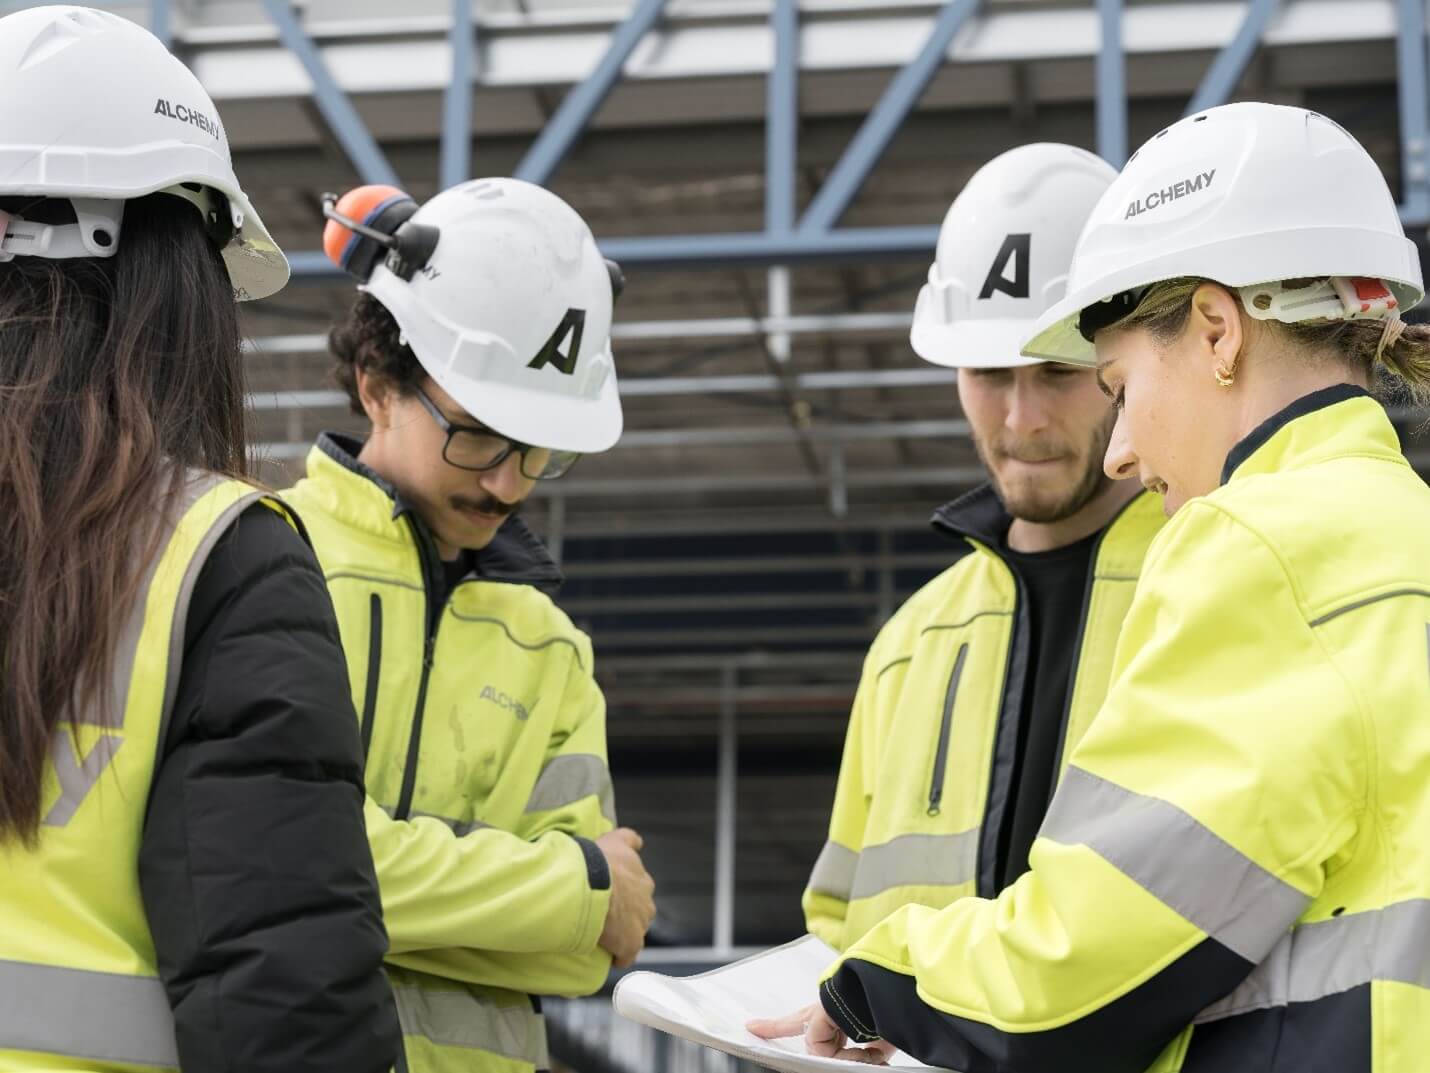 An image of 2 females and 2 males at work in white hard hats with yellow hi-vis standing amongst each other at work, mid discussion, female at front right of the image is pointing to a document while speaking. This image suggests a small team meeting.